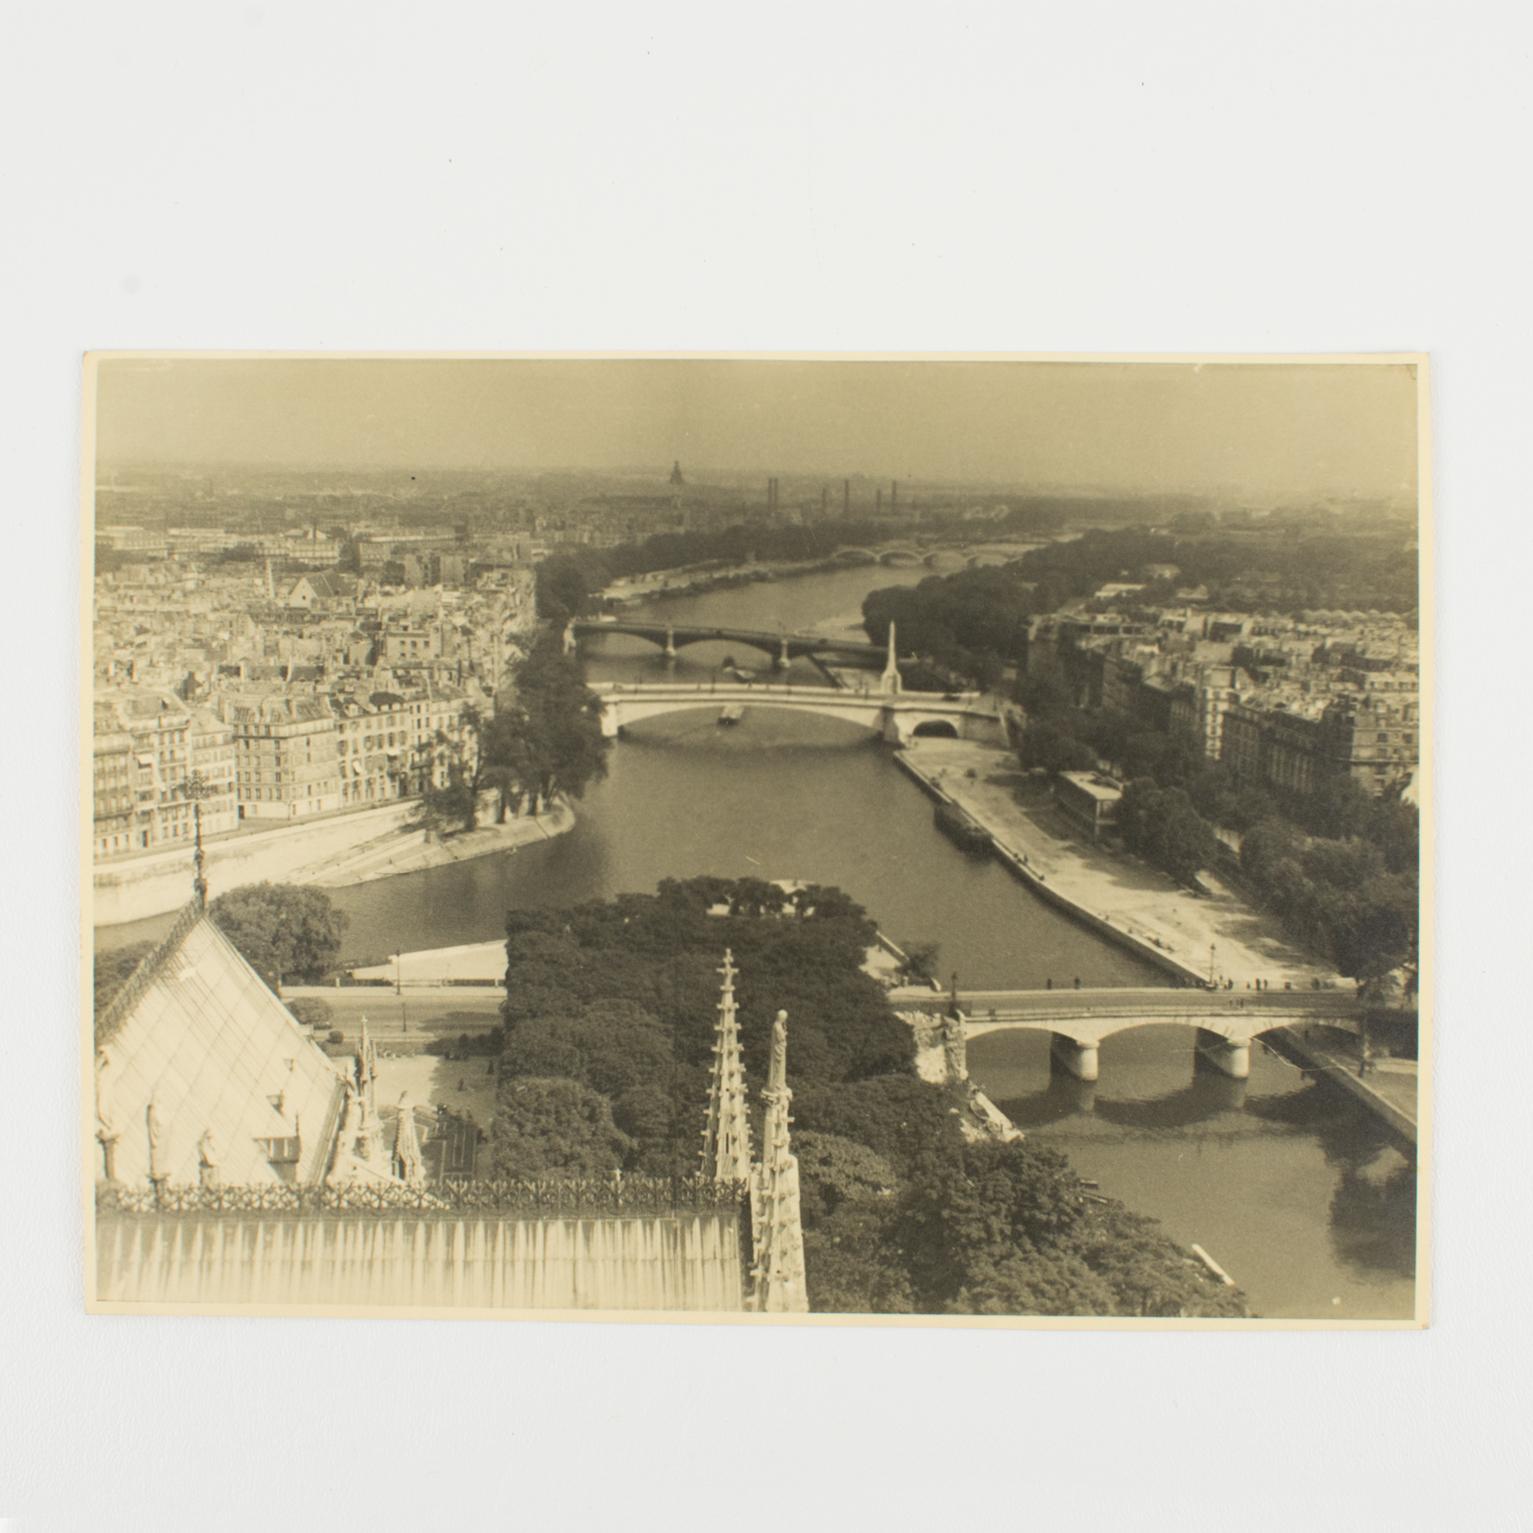 A unique original silver gelatin black and white photograph. A view of Paris and the River Seine from the Notre Dame Cathedral, circa 1950.
Features:
Original Silver Gelatin Print Photography Unframed.
Press Photography.
Press Agency: